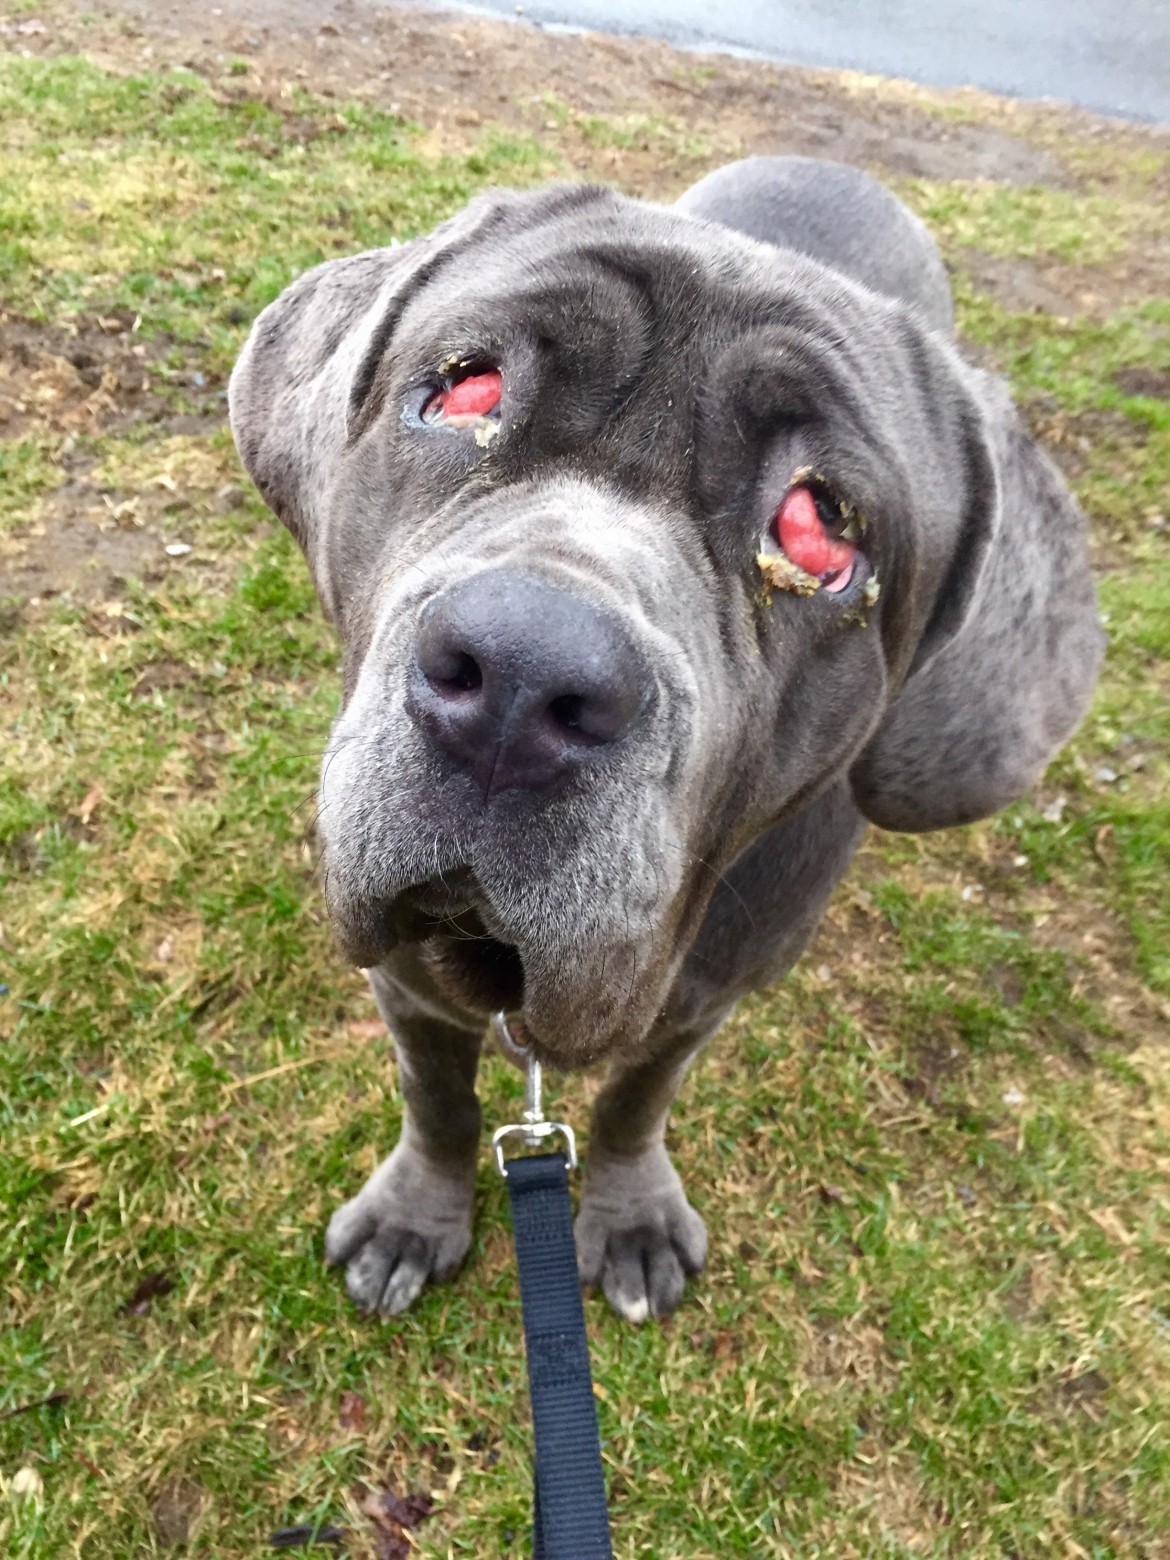 Zoe had an infection of the third eyelid, known as 'cherry eye.'